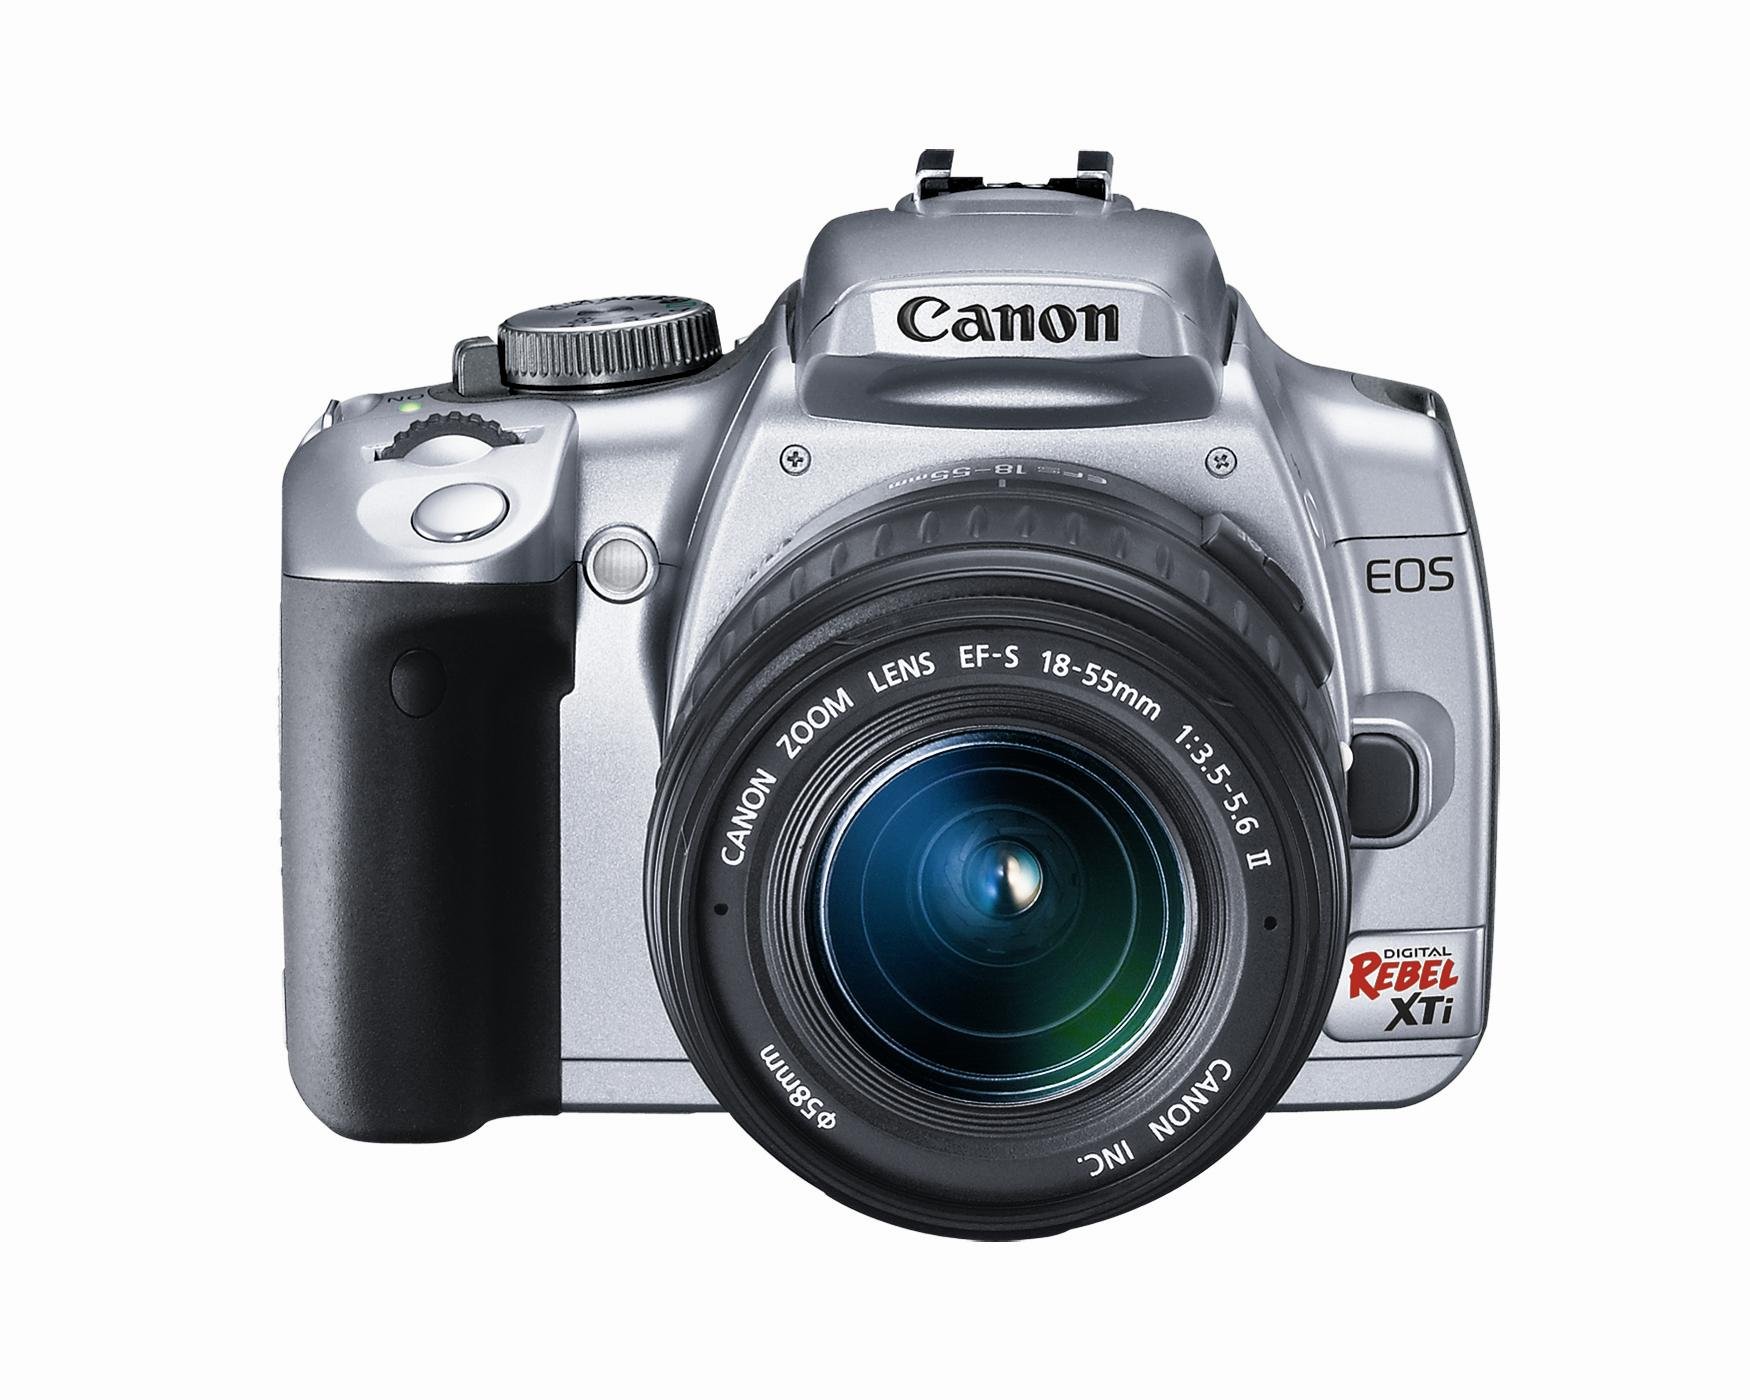 how-old-is-the-canon-rebel-xti-dslr-camera-with-ef-s-18-55mm-f-3-5-5-6-lens